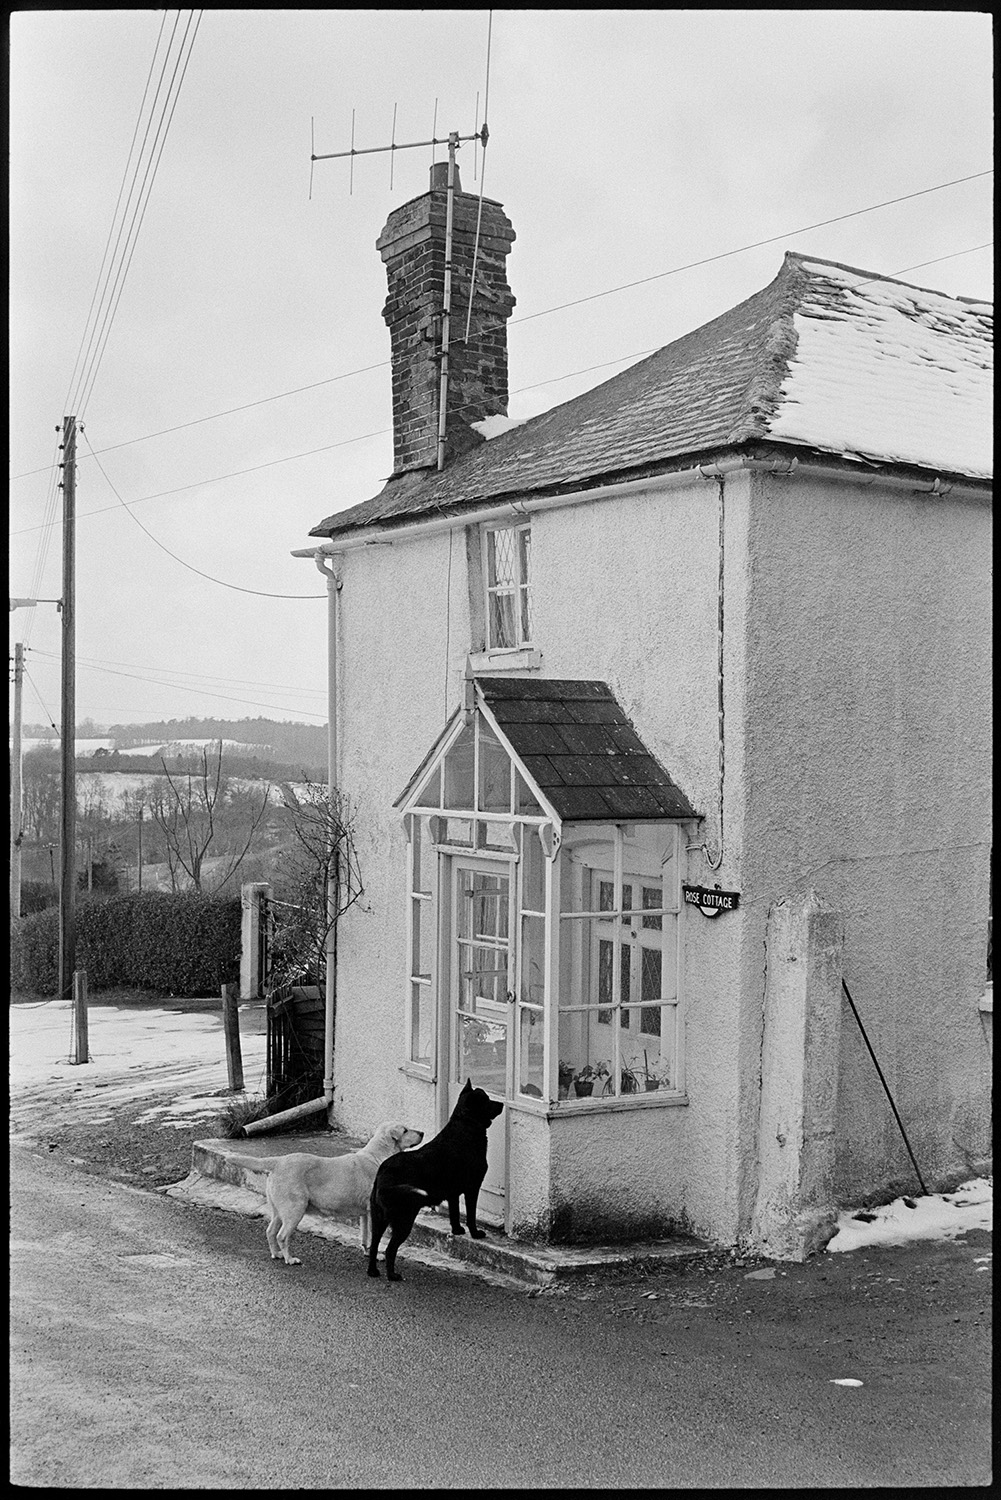 Cottage with porch and dog. 
[Two dogs waiting outside the porch of Rose Cottage in West Lane, Dolton. The roof of the cottage is partially covered with snow.]